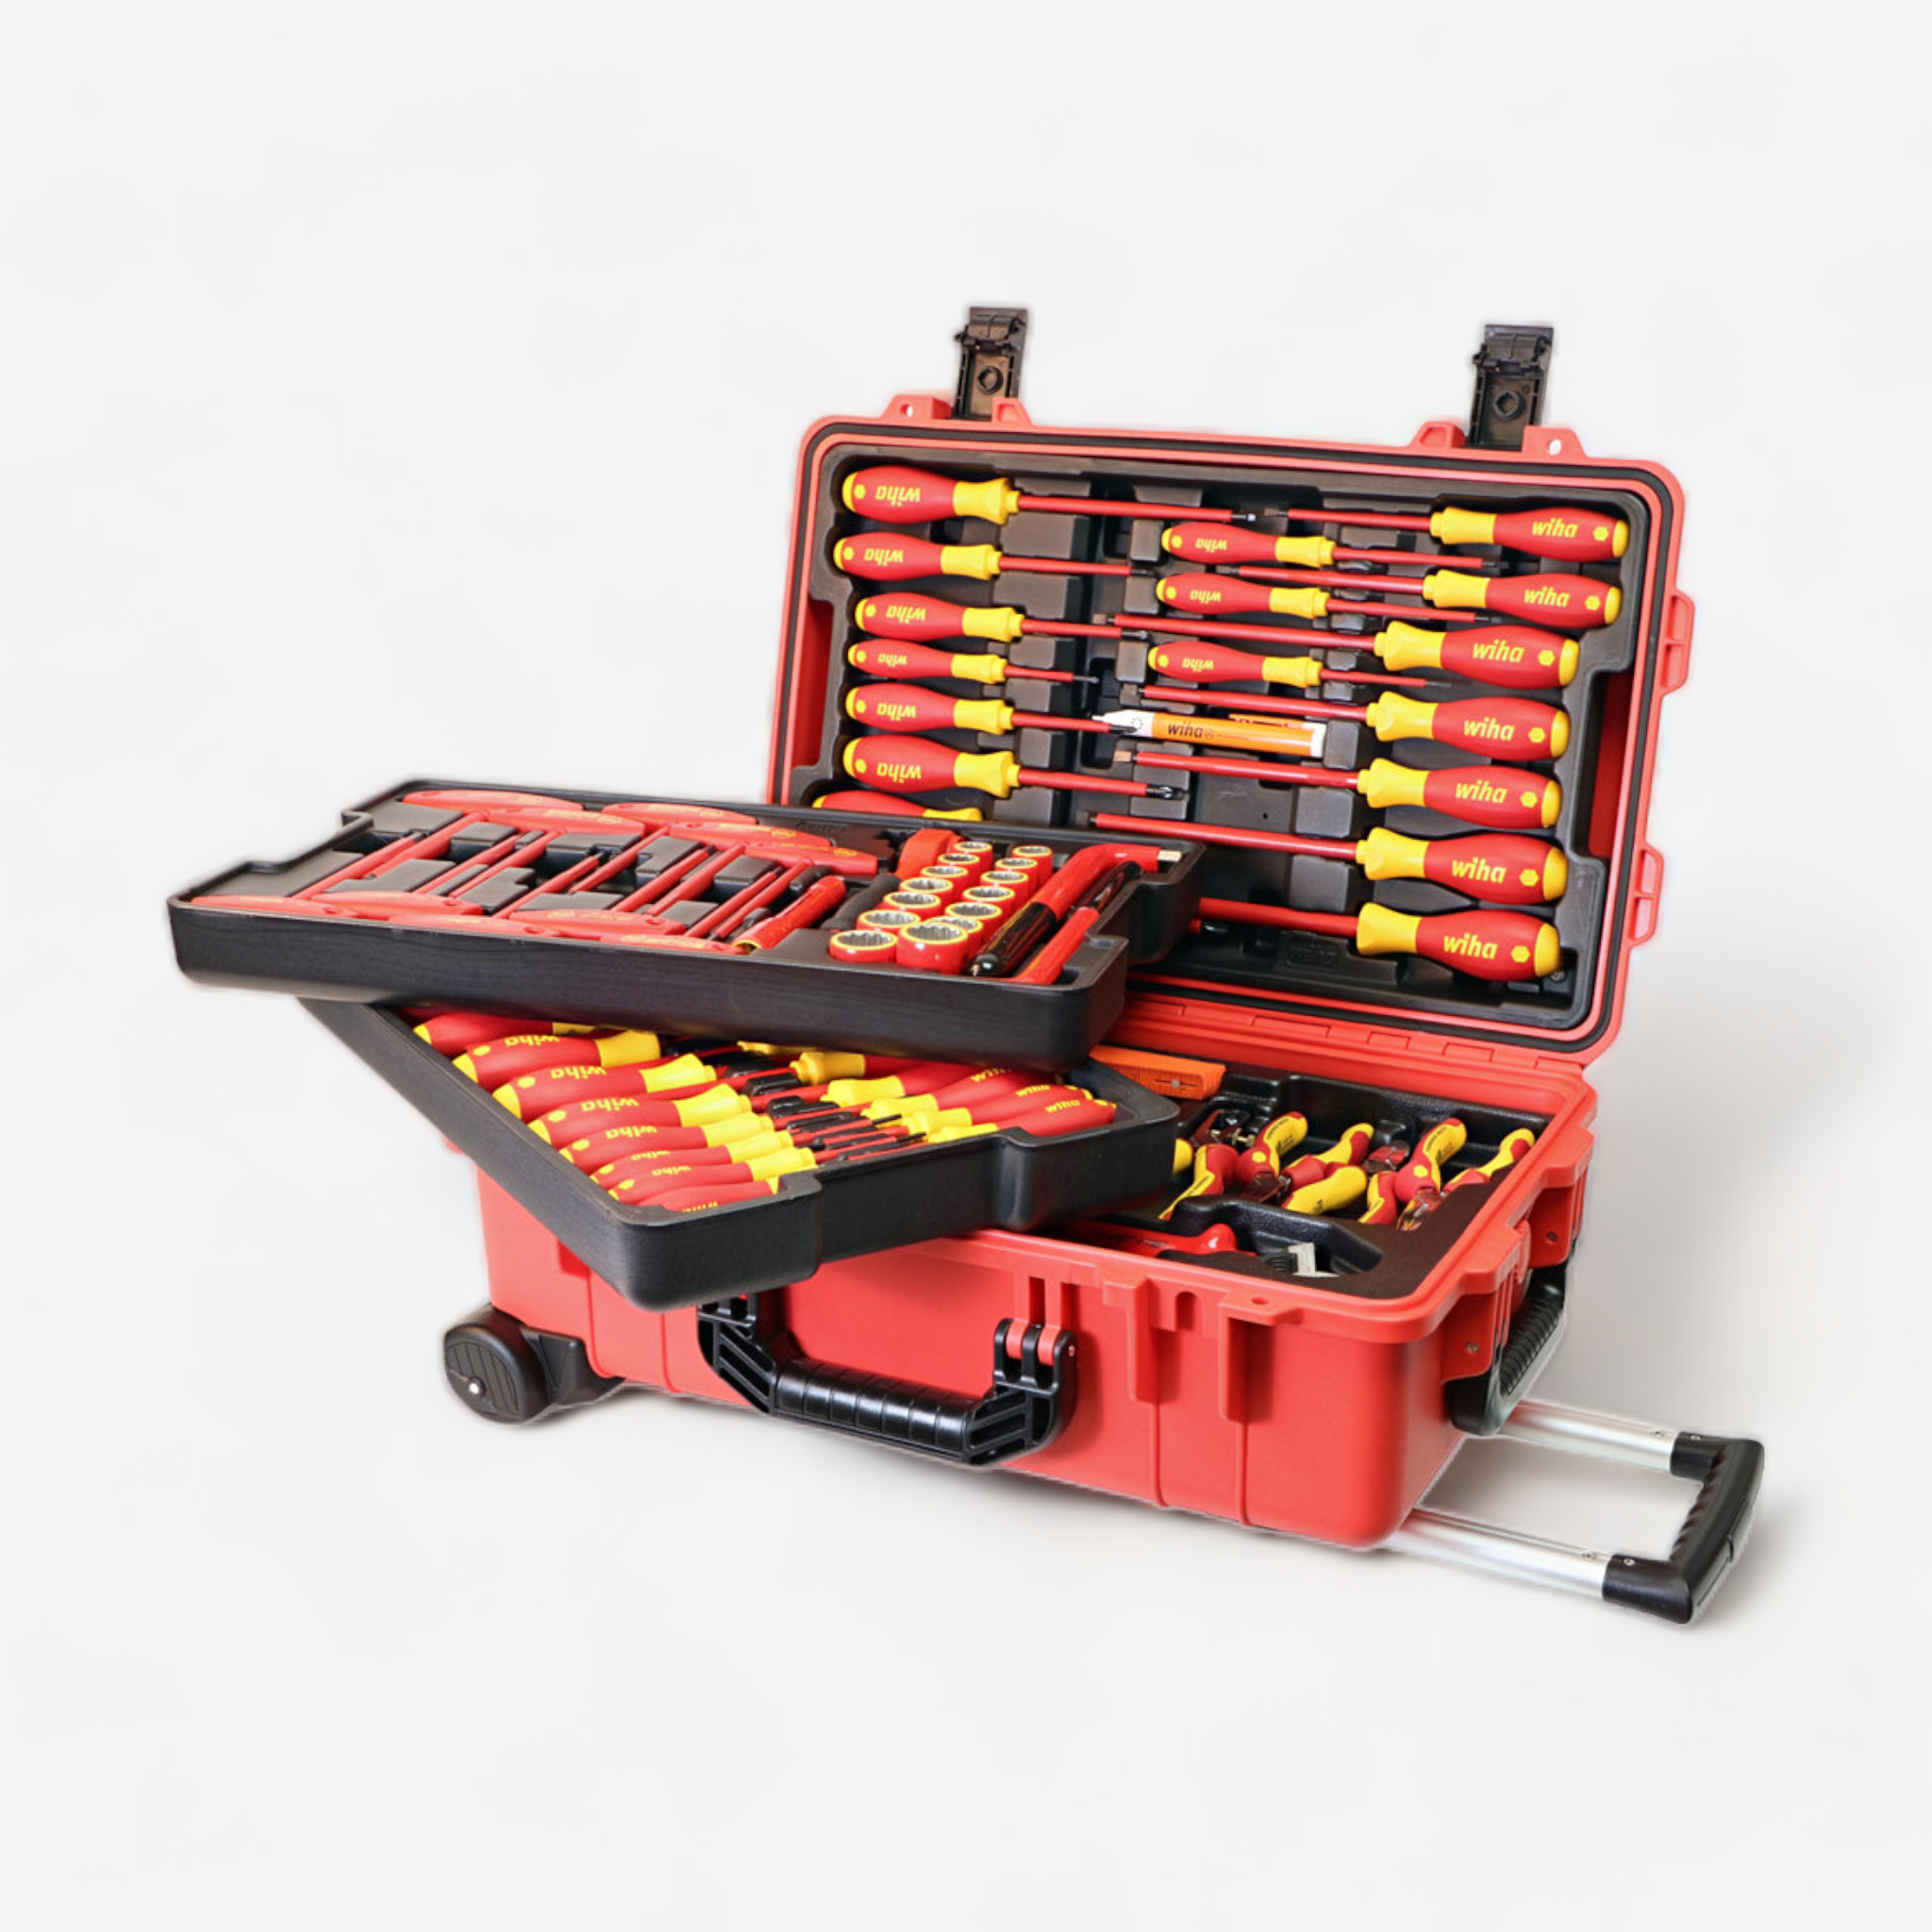 Wiha Insulated 80 Piece Set In Rolling Tool Case